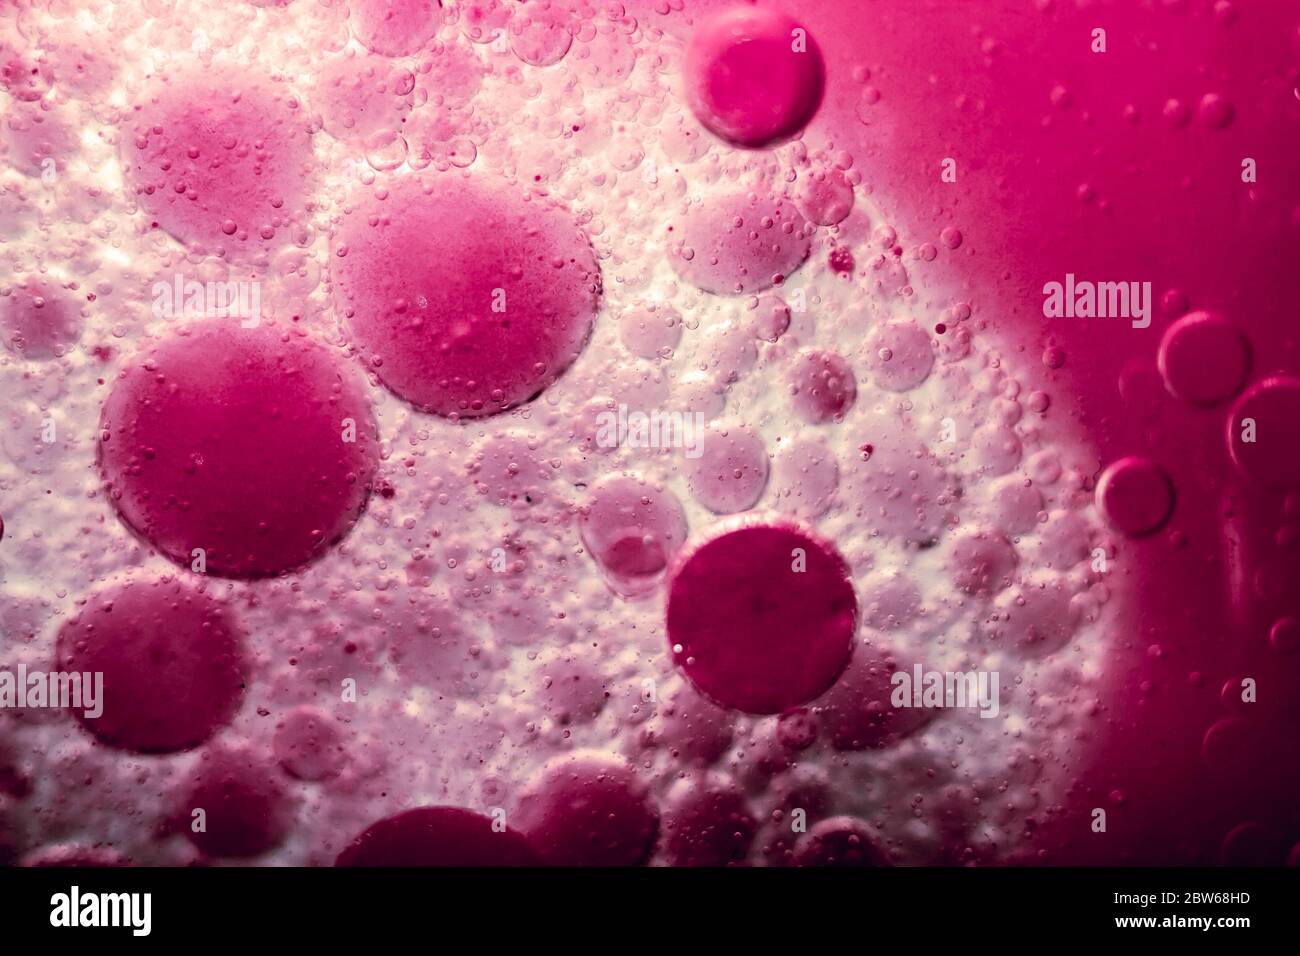 magnification of purple cell bubbles.  Evolution and growth in microbiology as concept macro photography full frame background. Stock Photo